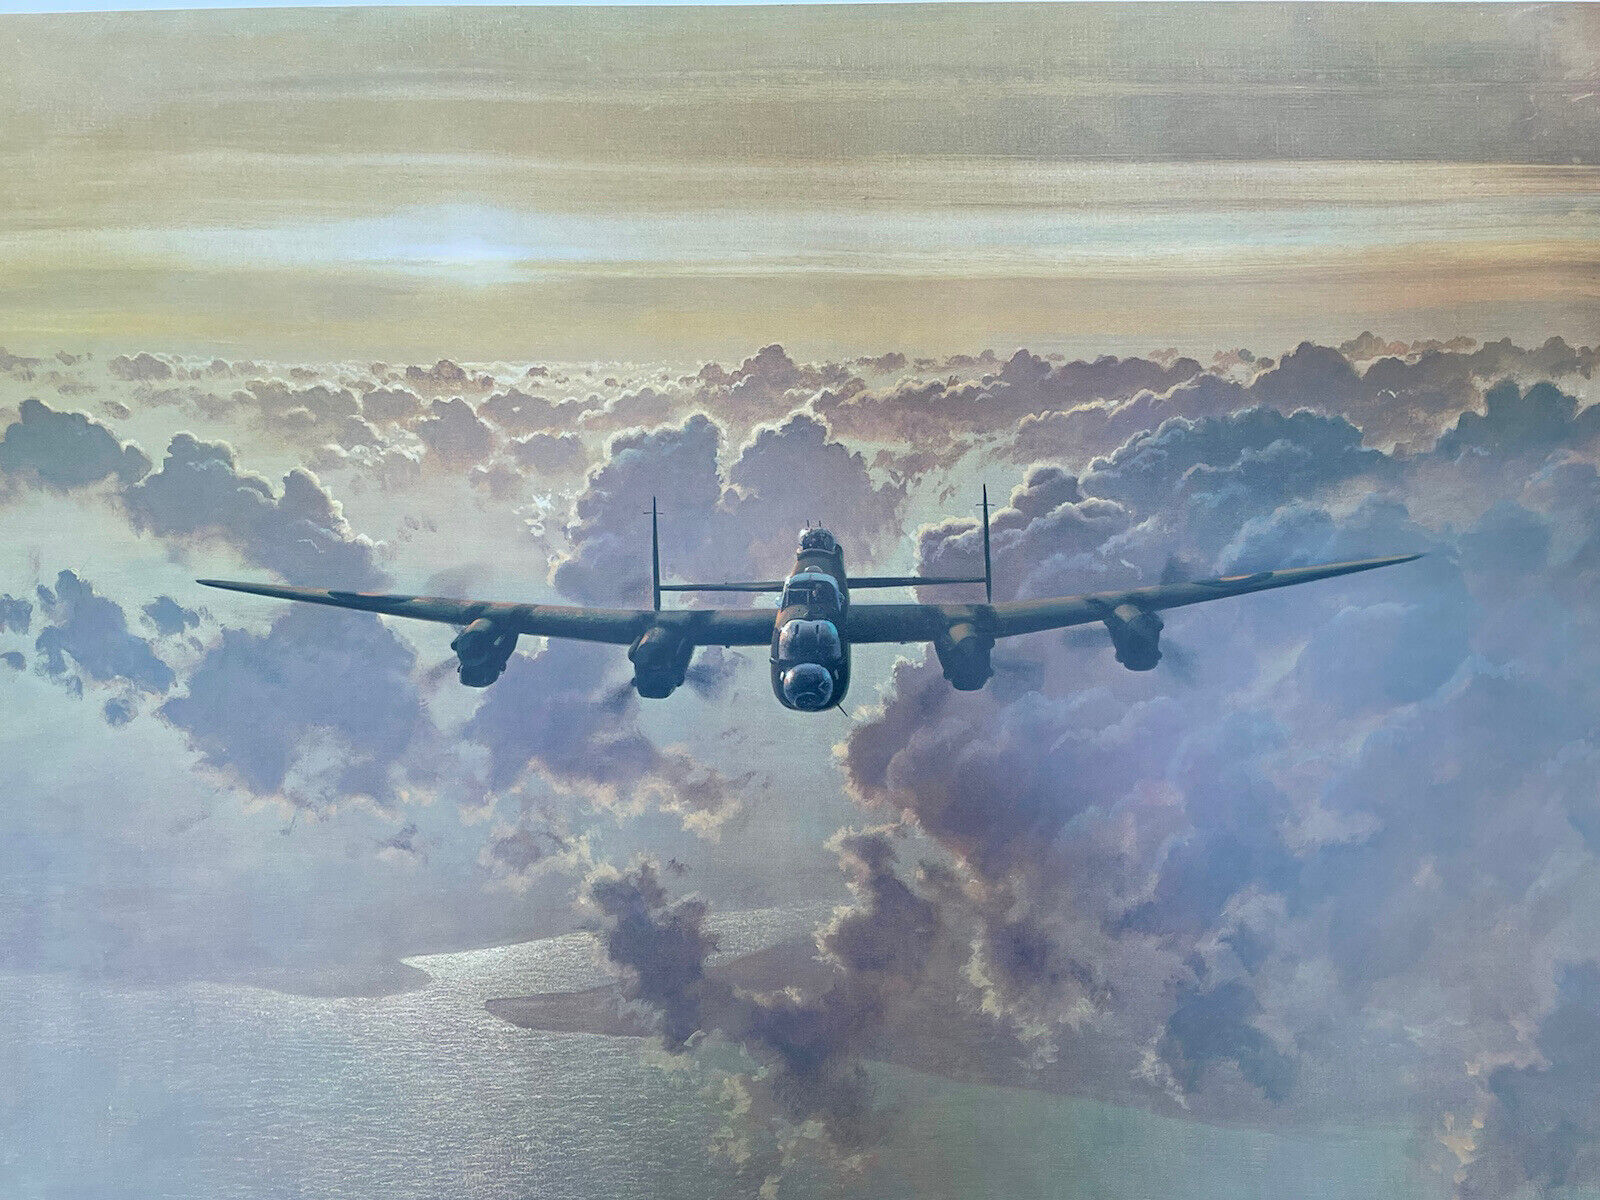 1977 GERALD COULSON OUTBOUND LANCASTER BOMBER CROSSING ART PRINT 34x25\